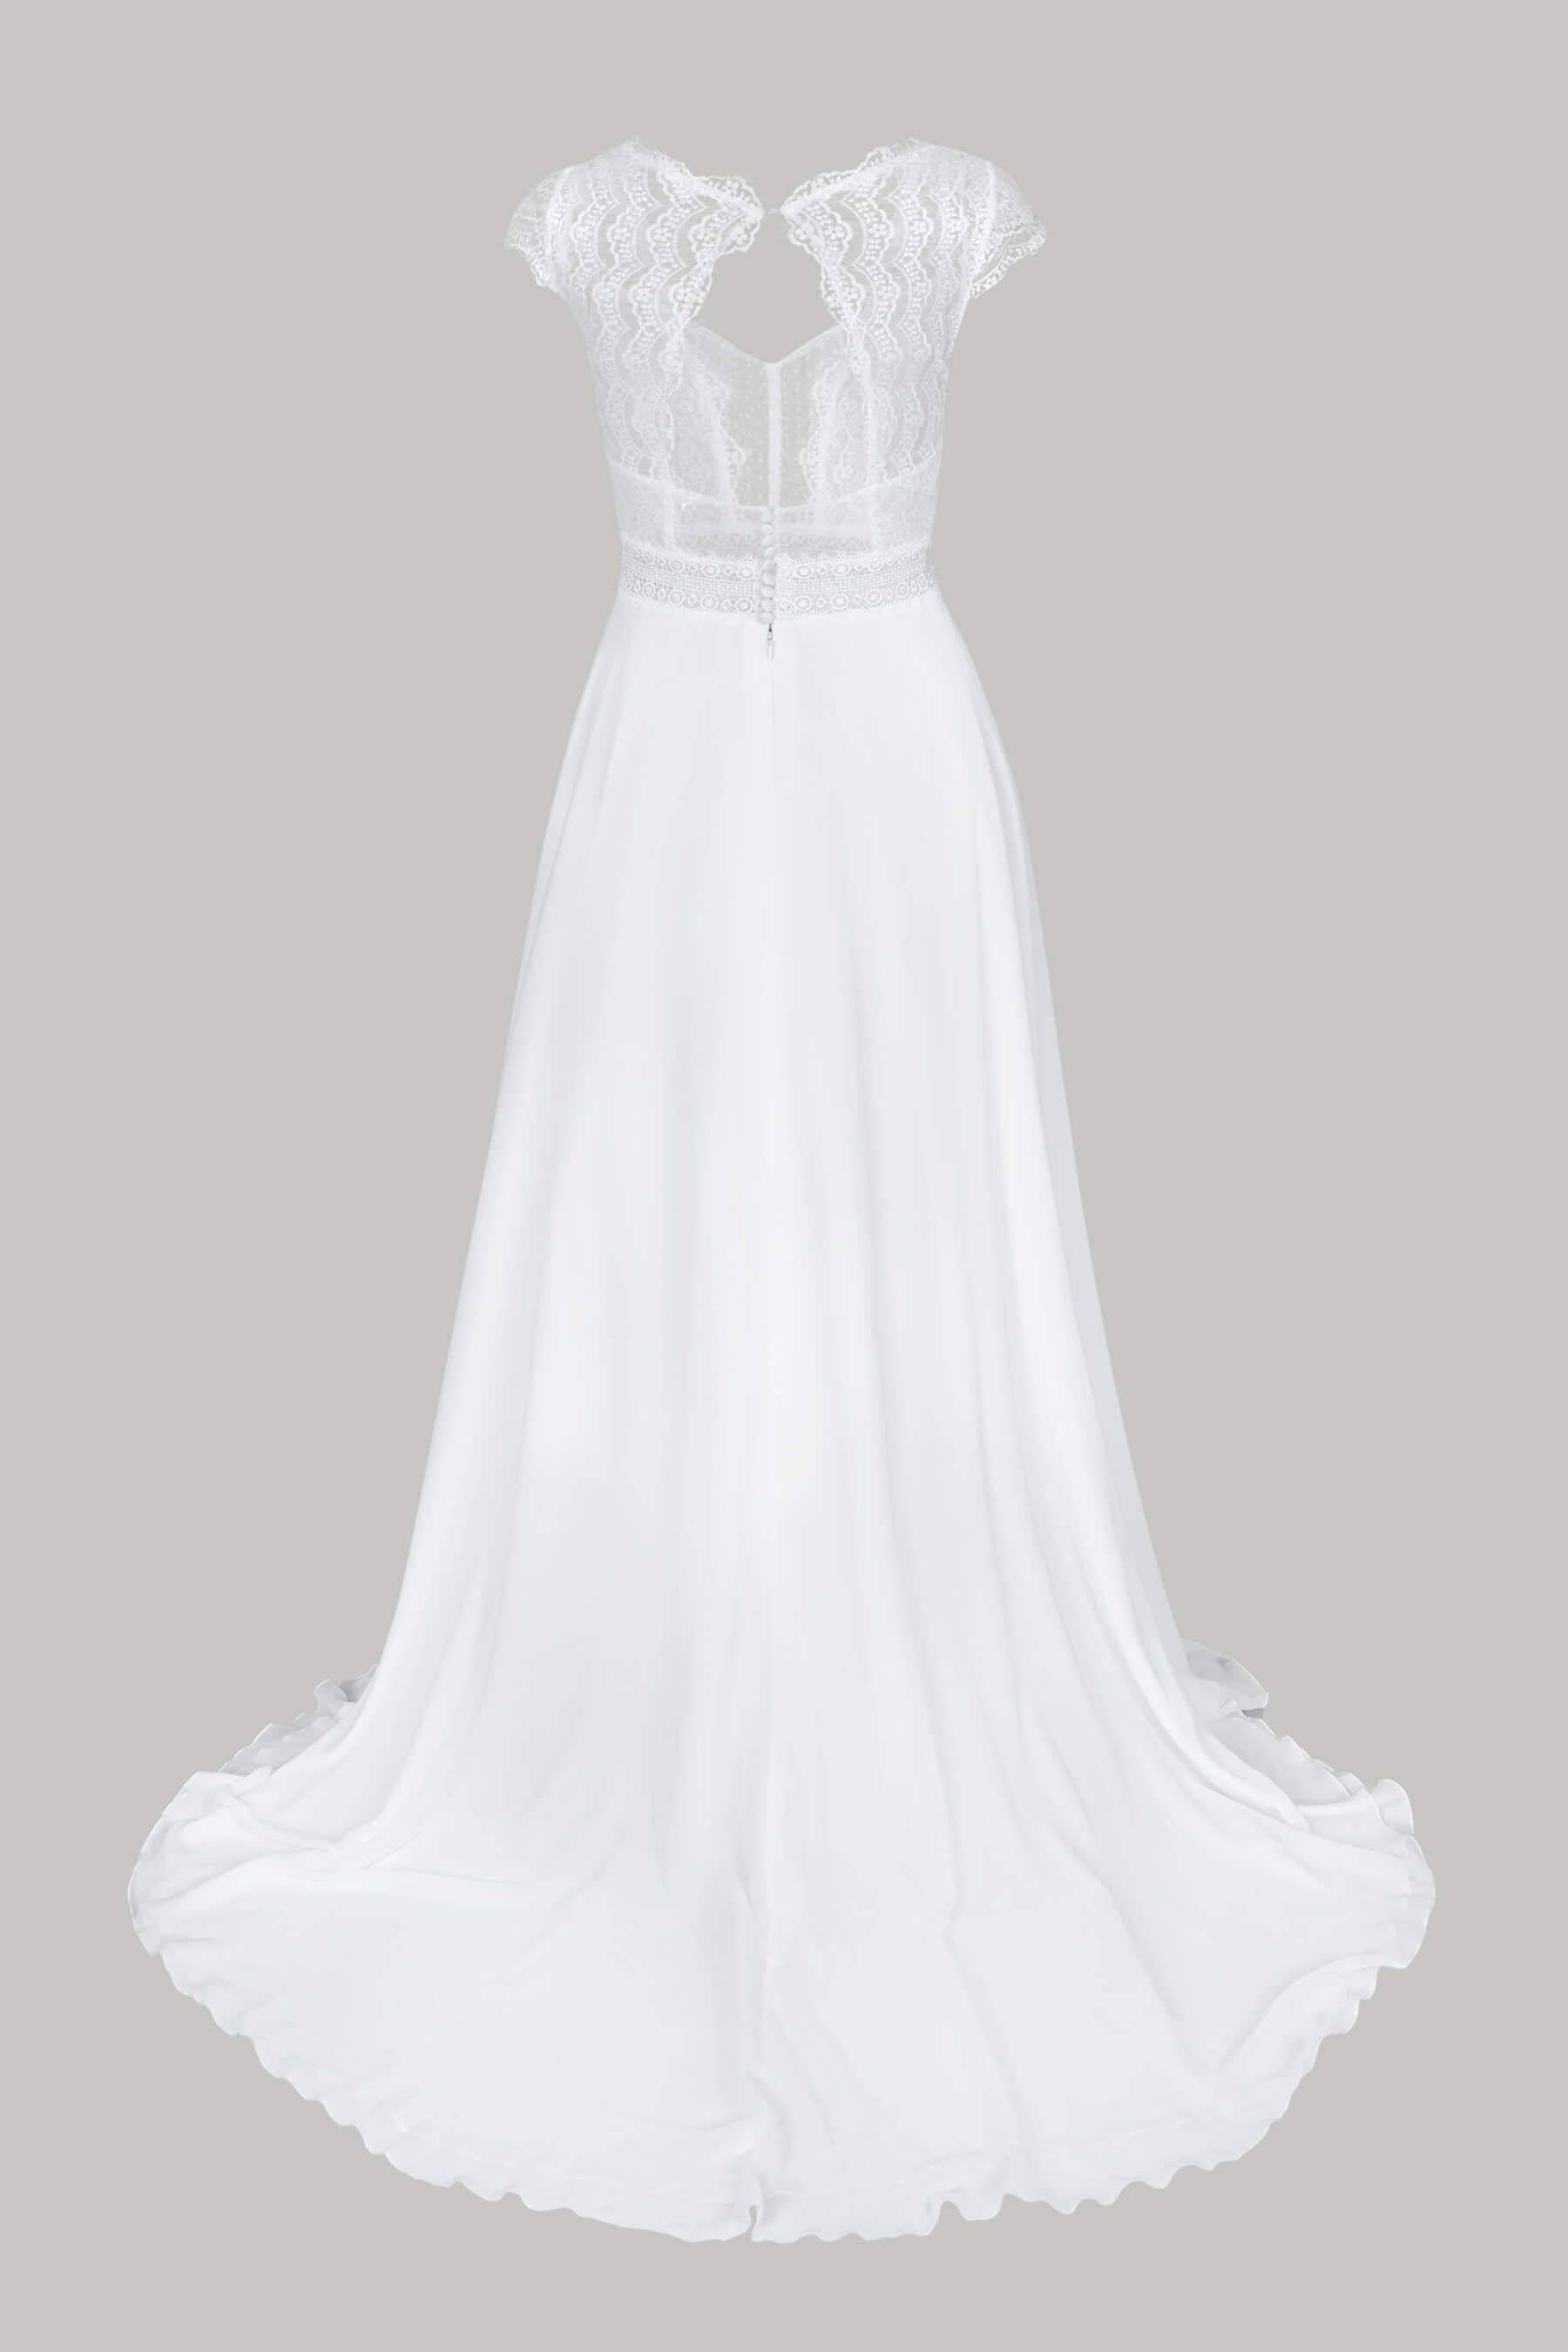 Discover stunning A-line V-neck lace wedding dress at Bride Now